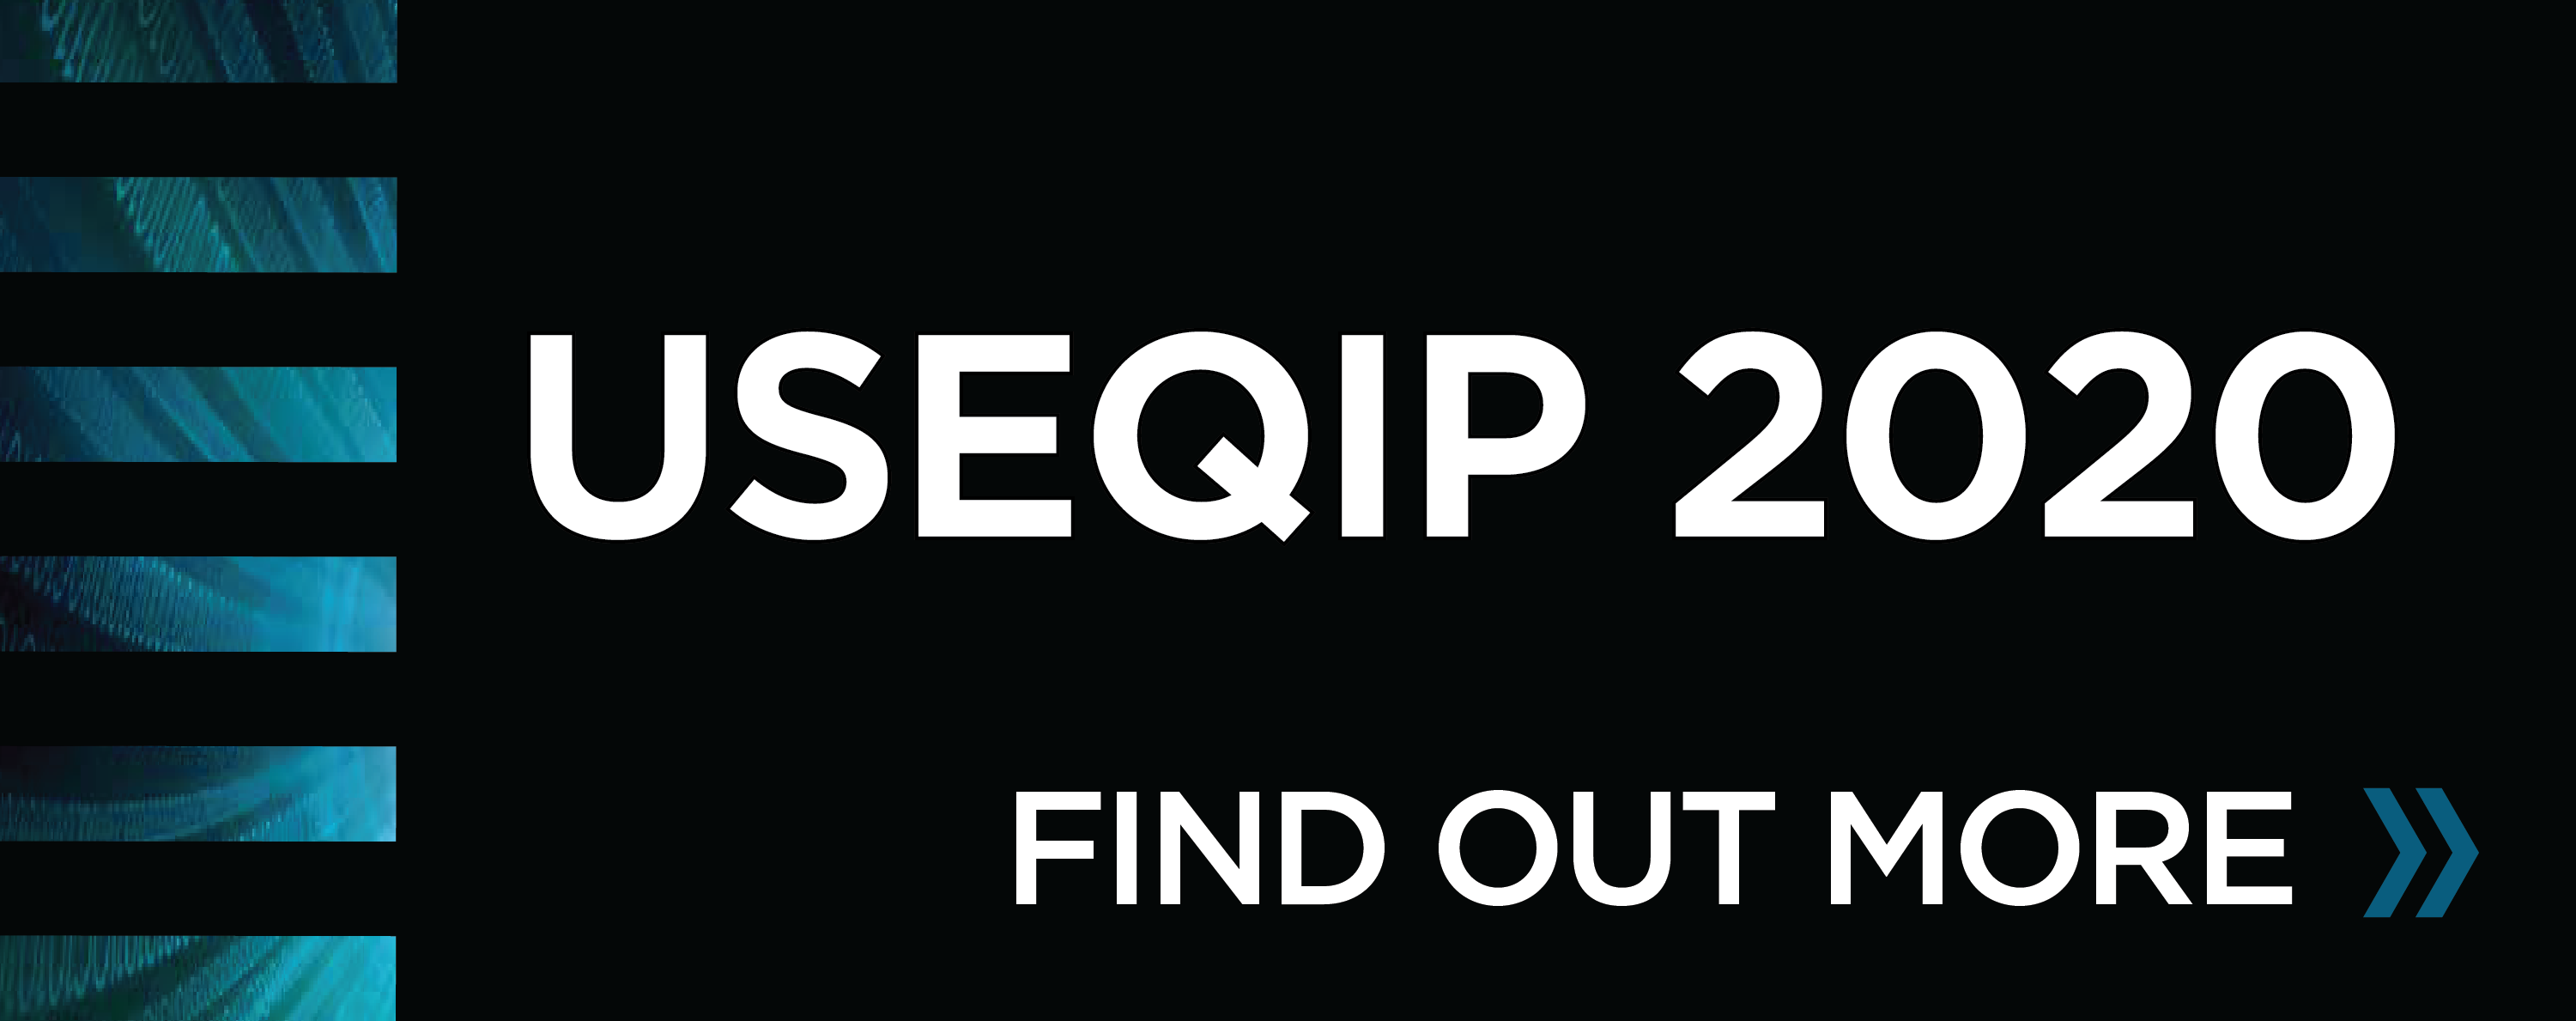 USEQIP 2020 Find out more